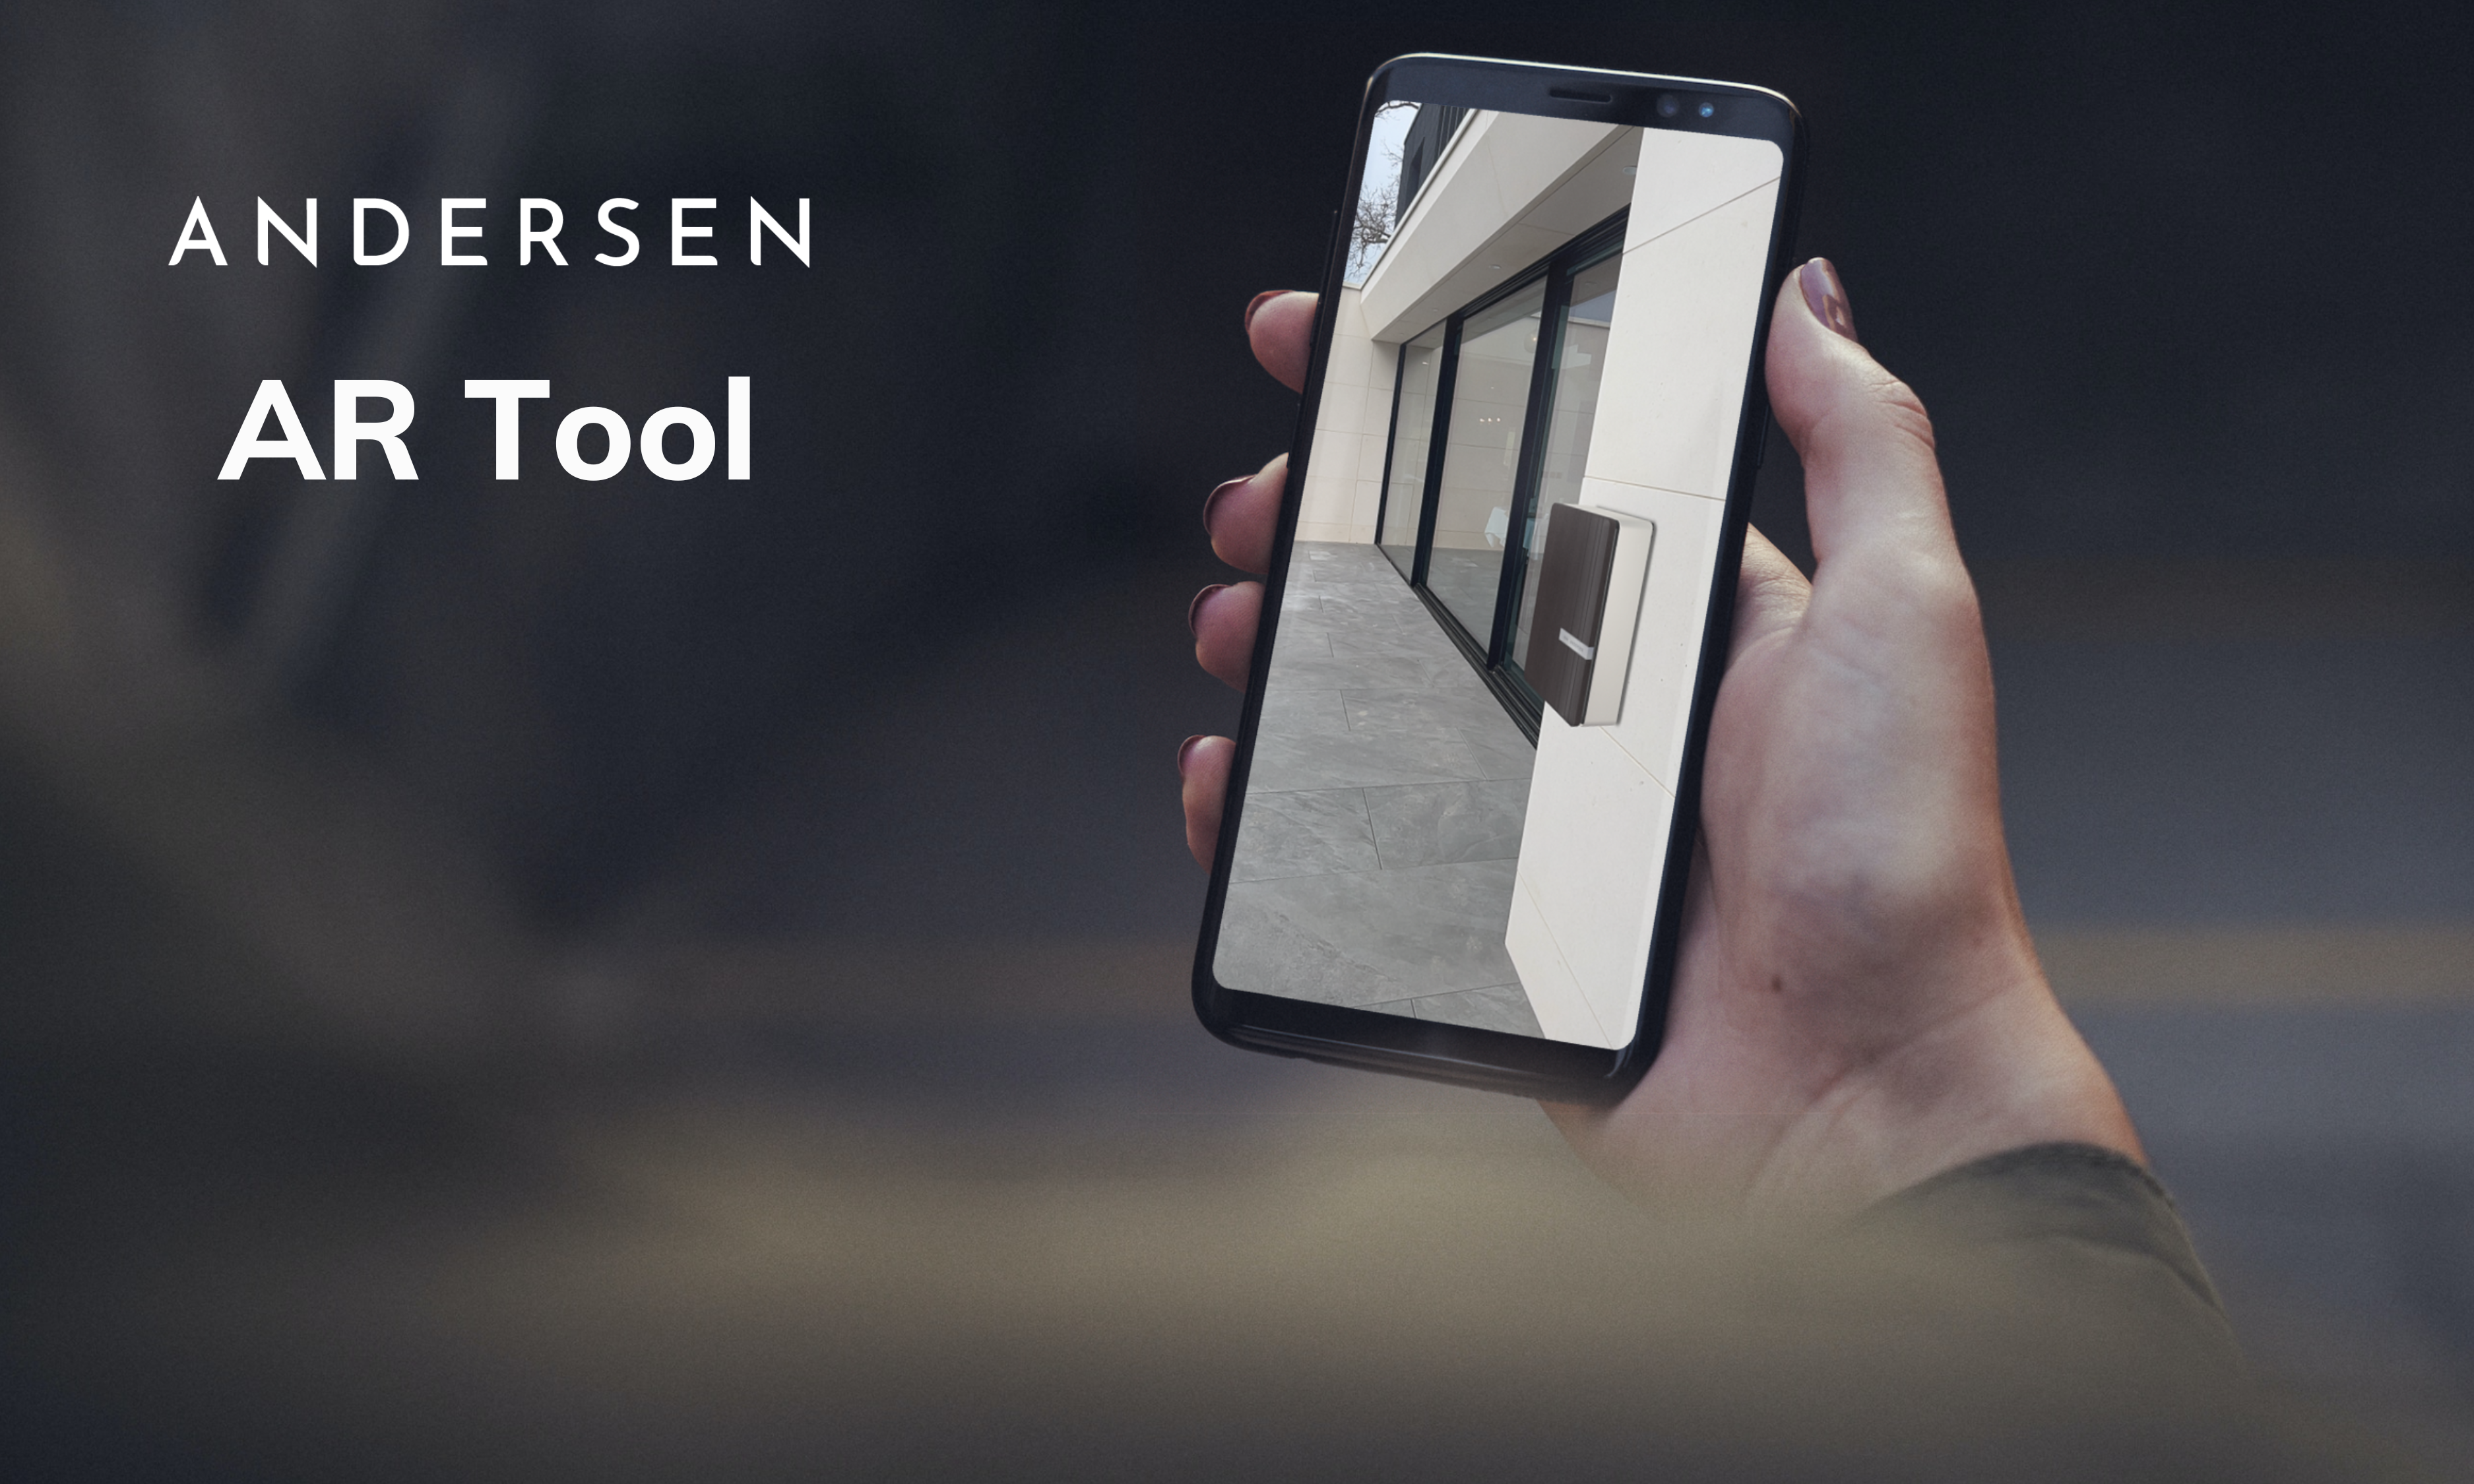 Using the Andersen Augmented Reality (AR) tool